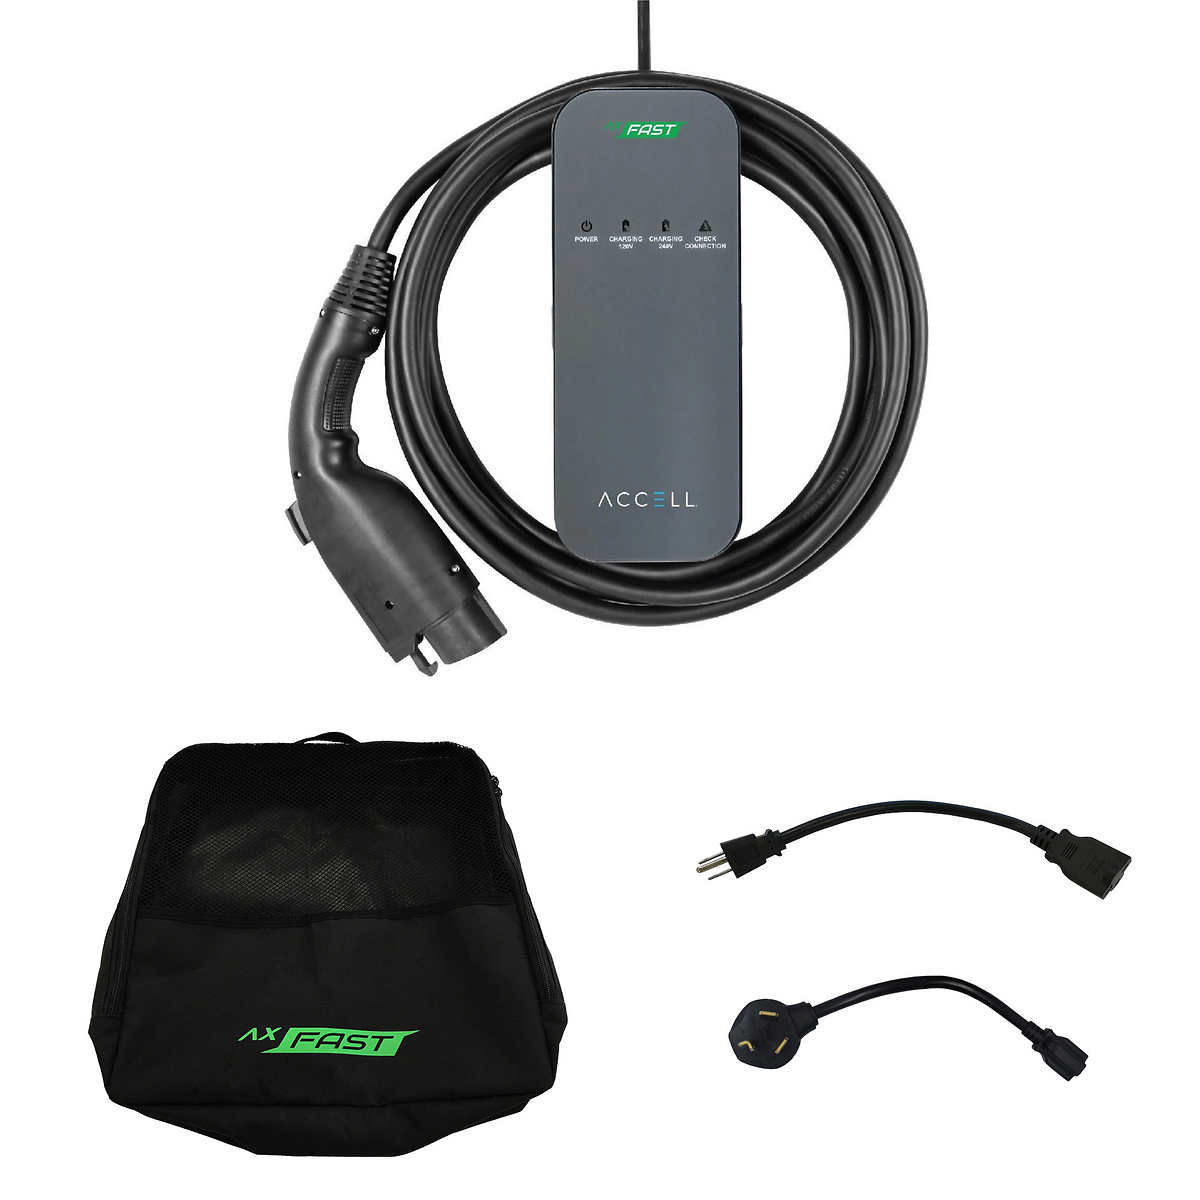 AxFAST Level 2 Portable Electric Vehicle Charger Baazing